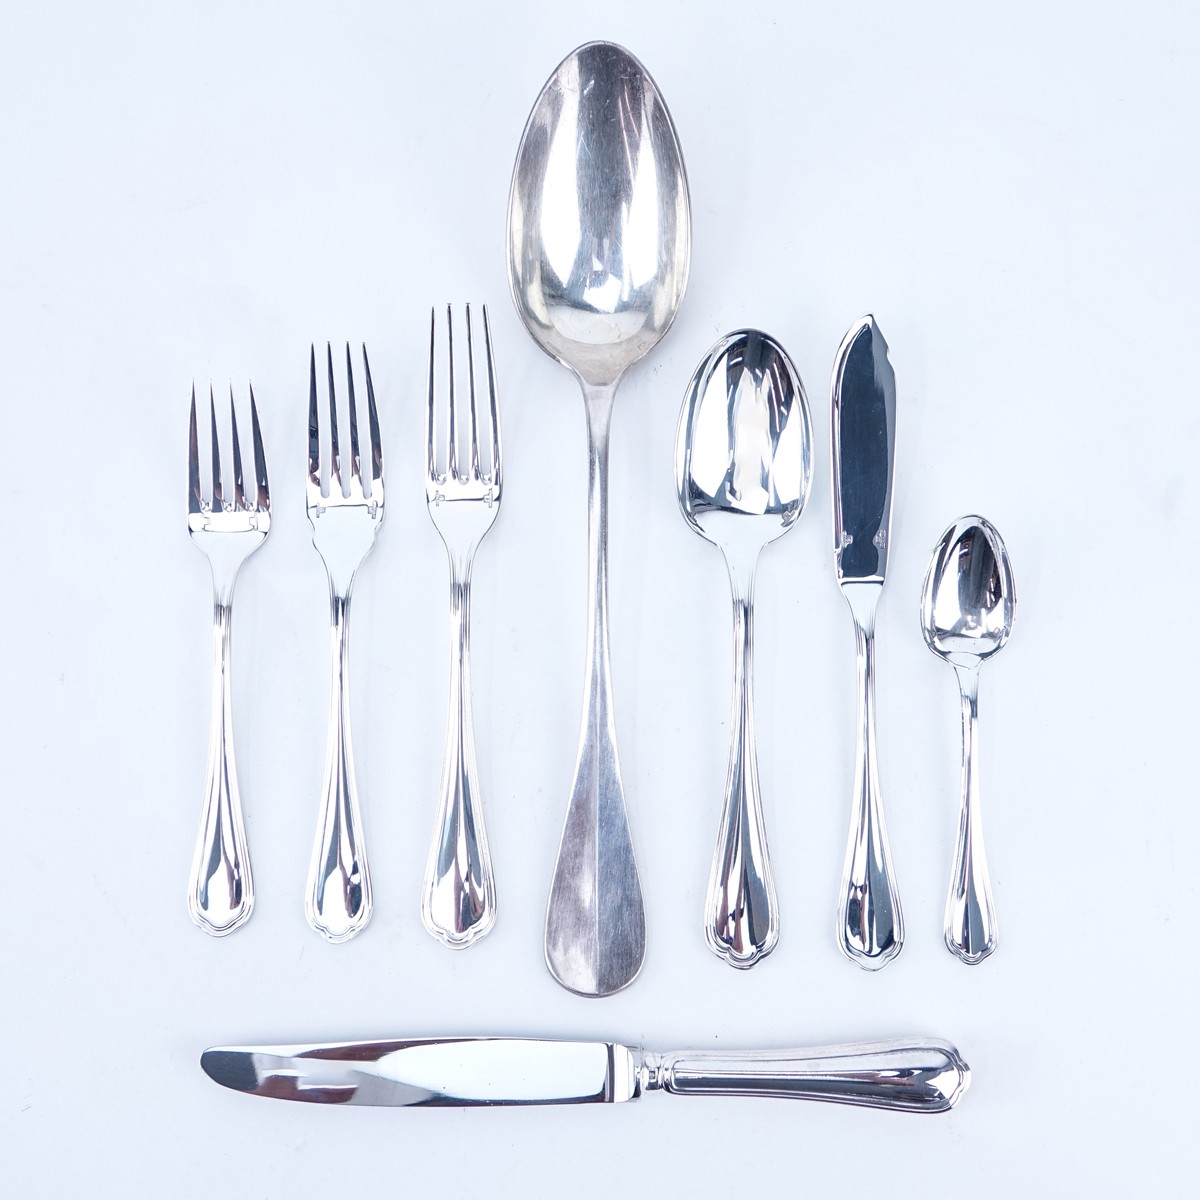 Eighty Five (85) Piece Christofle "Spatours" Silver Plate Flatware with Associated Serving Spoon. Includes: 12 knives 9", 12 forks 7-1/2", 12 salad forks, 12 fish forks 7", 12 spoons 7-1/2", 12 teaspoons, and 12 butter spreaders, large serving spoon 11".